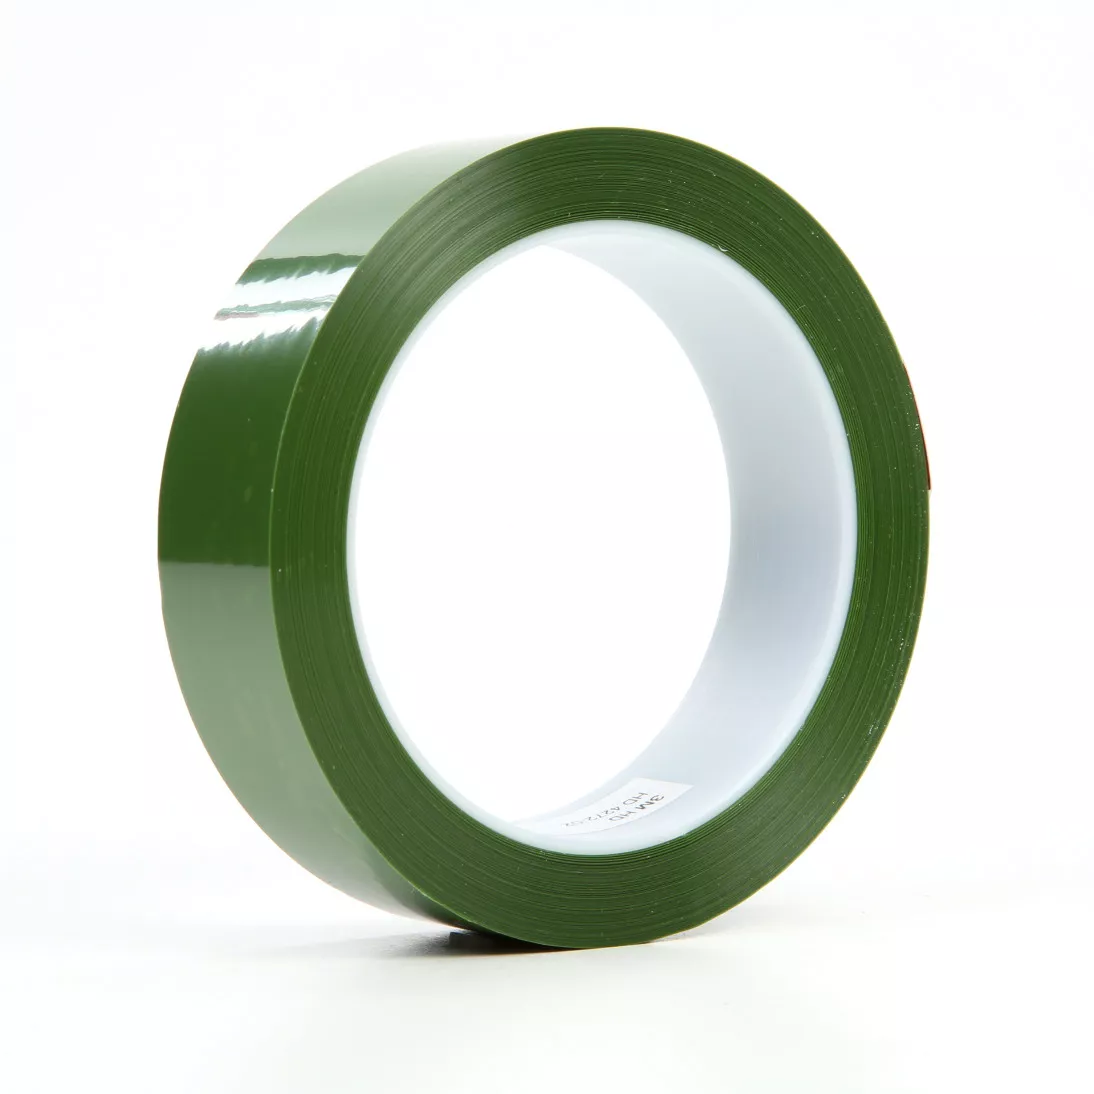 3M™ Polyester Tape 8402, Green, 1.9 mil, 25.4 mm x 65.8 m, 36 Roll/Case